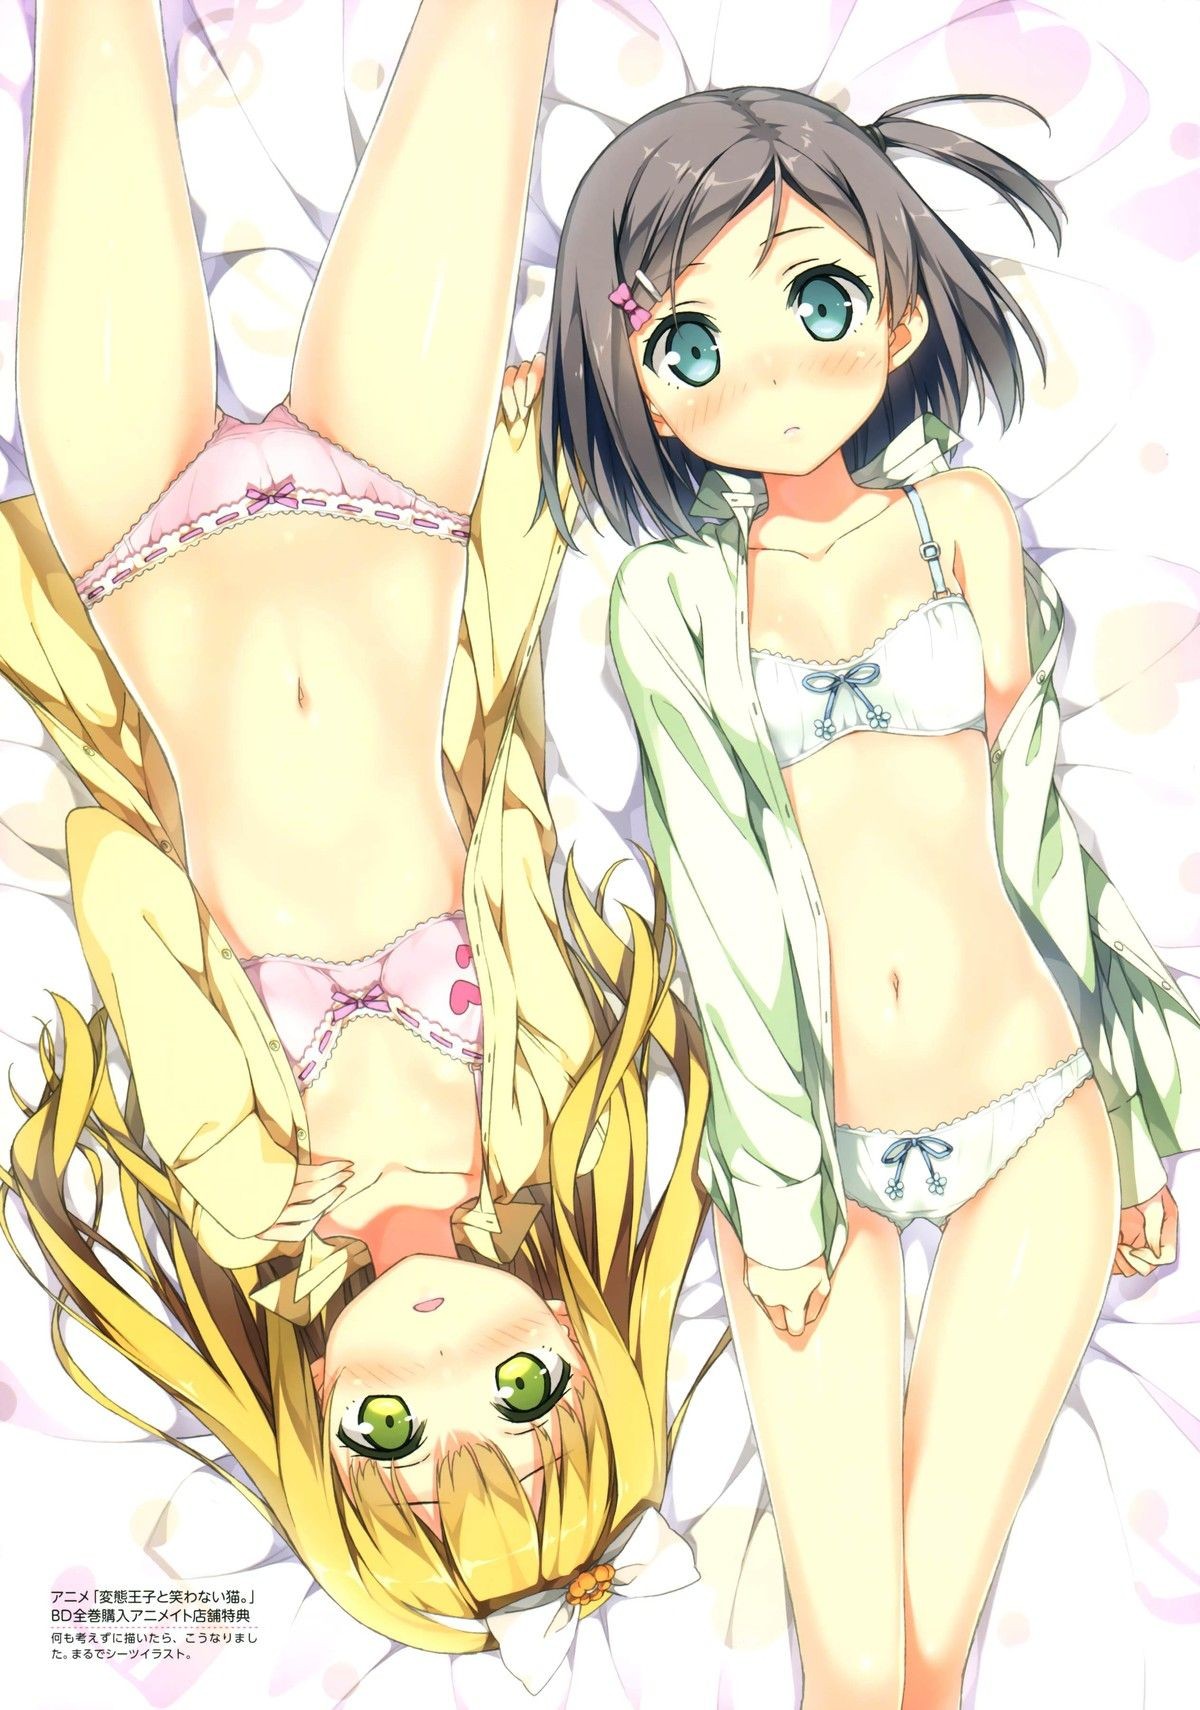 Couple Fucking [Image] Schebodiellarro Wwwwwww Of Azusa-chan Of The Animated Cat At Any Time Sapphic